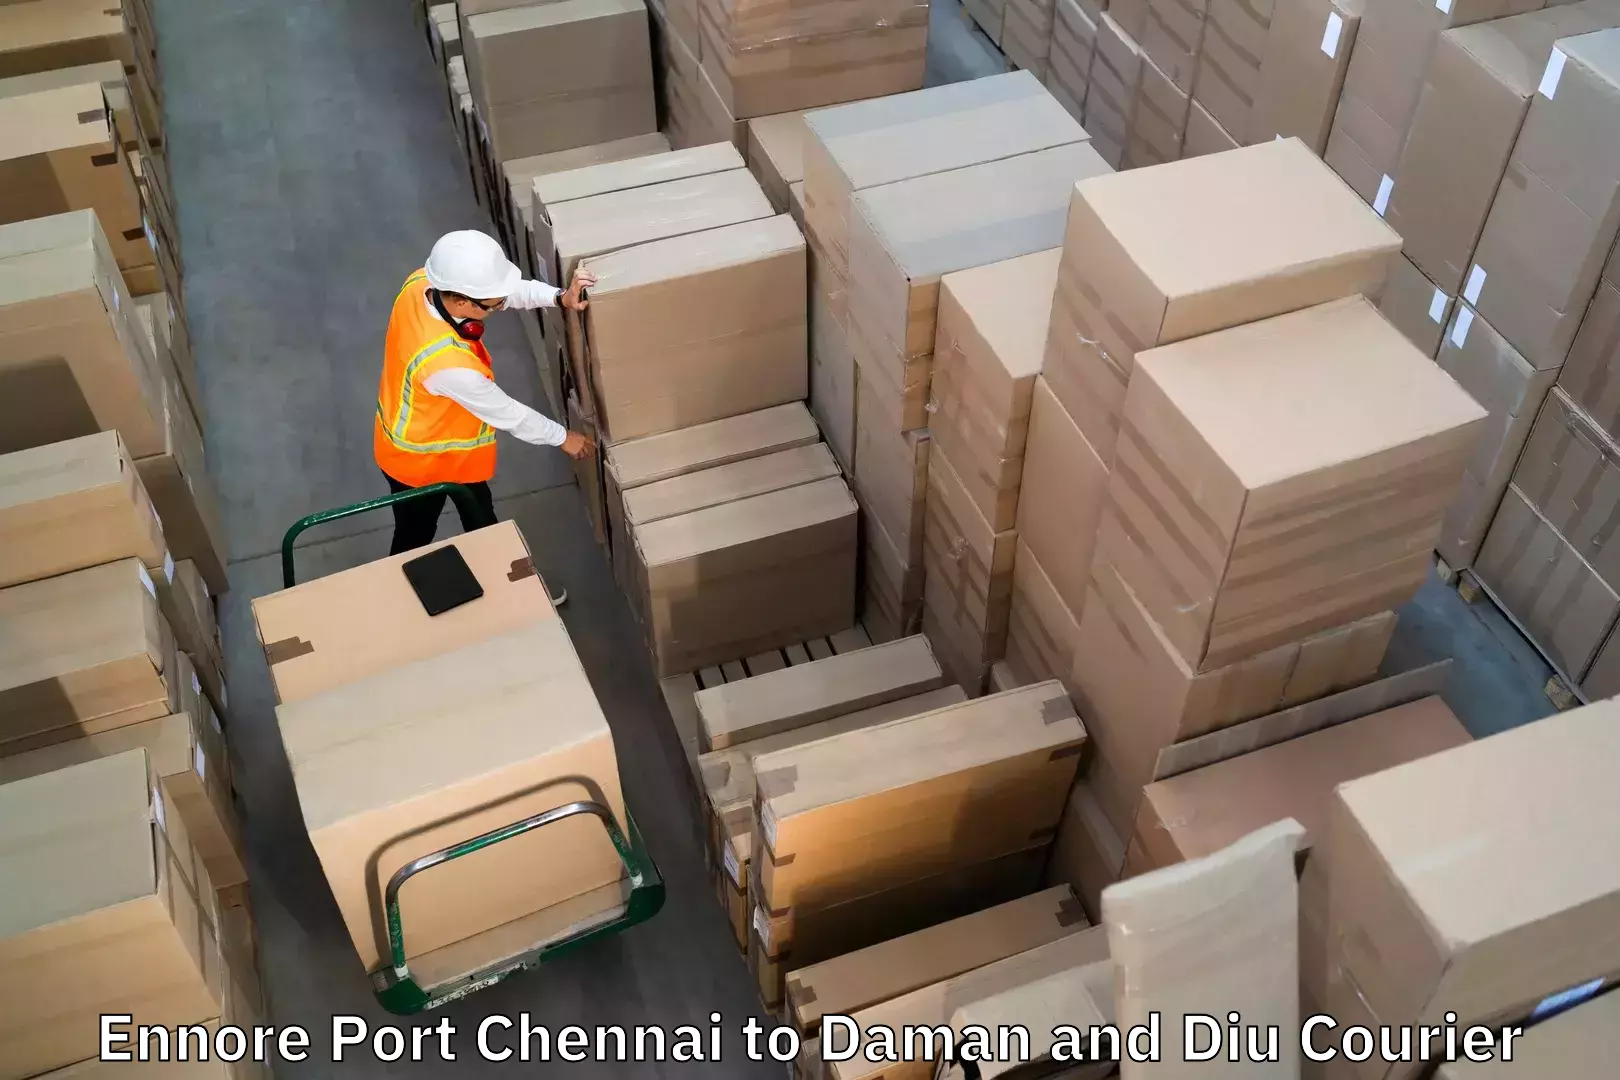 Personalized luggage shipping in Ennore Port Chennai to Daman